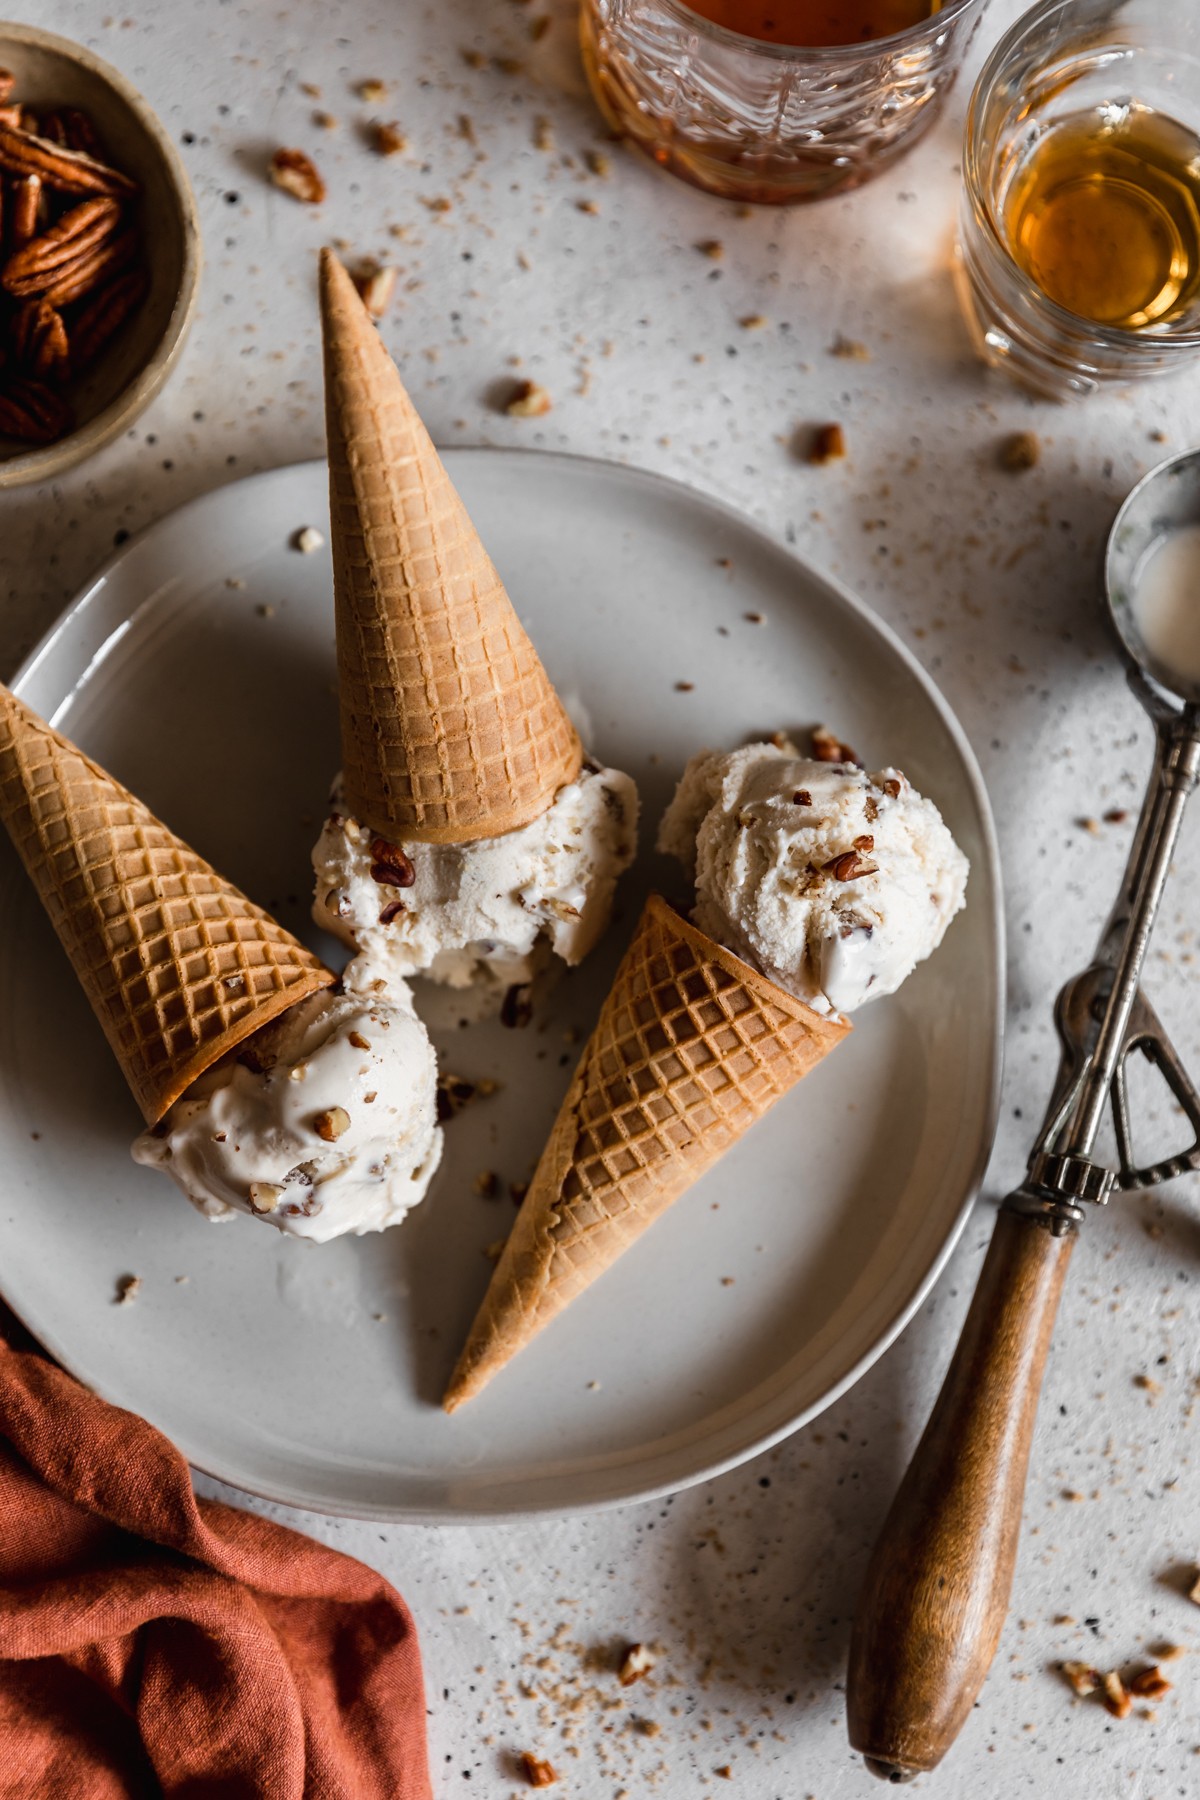 A closeup overhead image of three scoops of bourbon butter pecan ice cream with cones on a white plate next to a vintage ice cream scoop, two glasses of whiskey, and burnt orange linen. The plate is on a white speckled table dusted with chopped pecans.